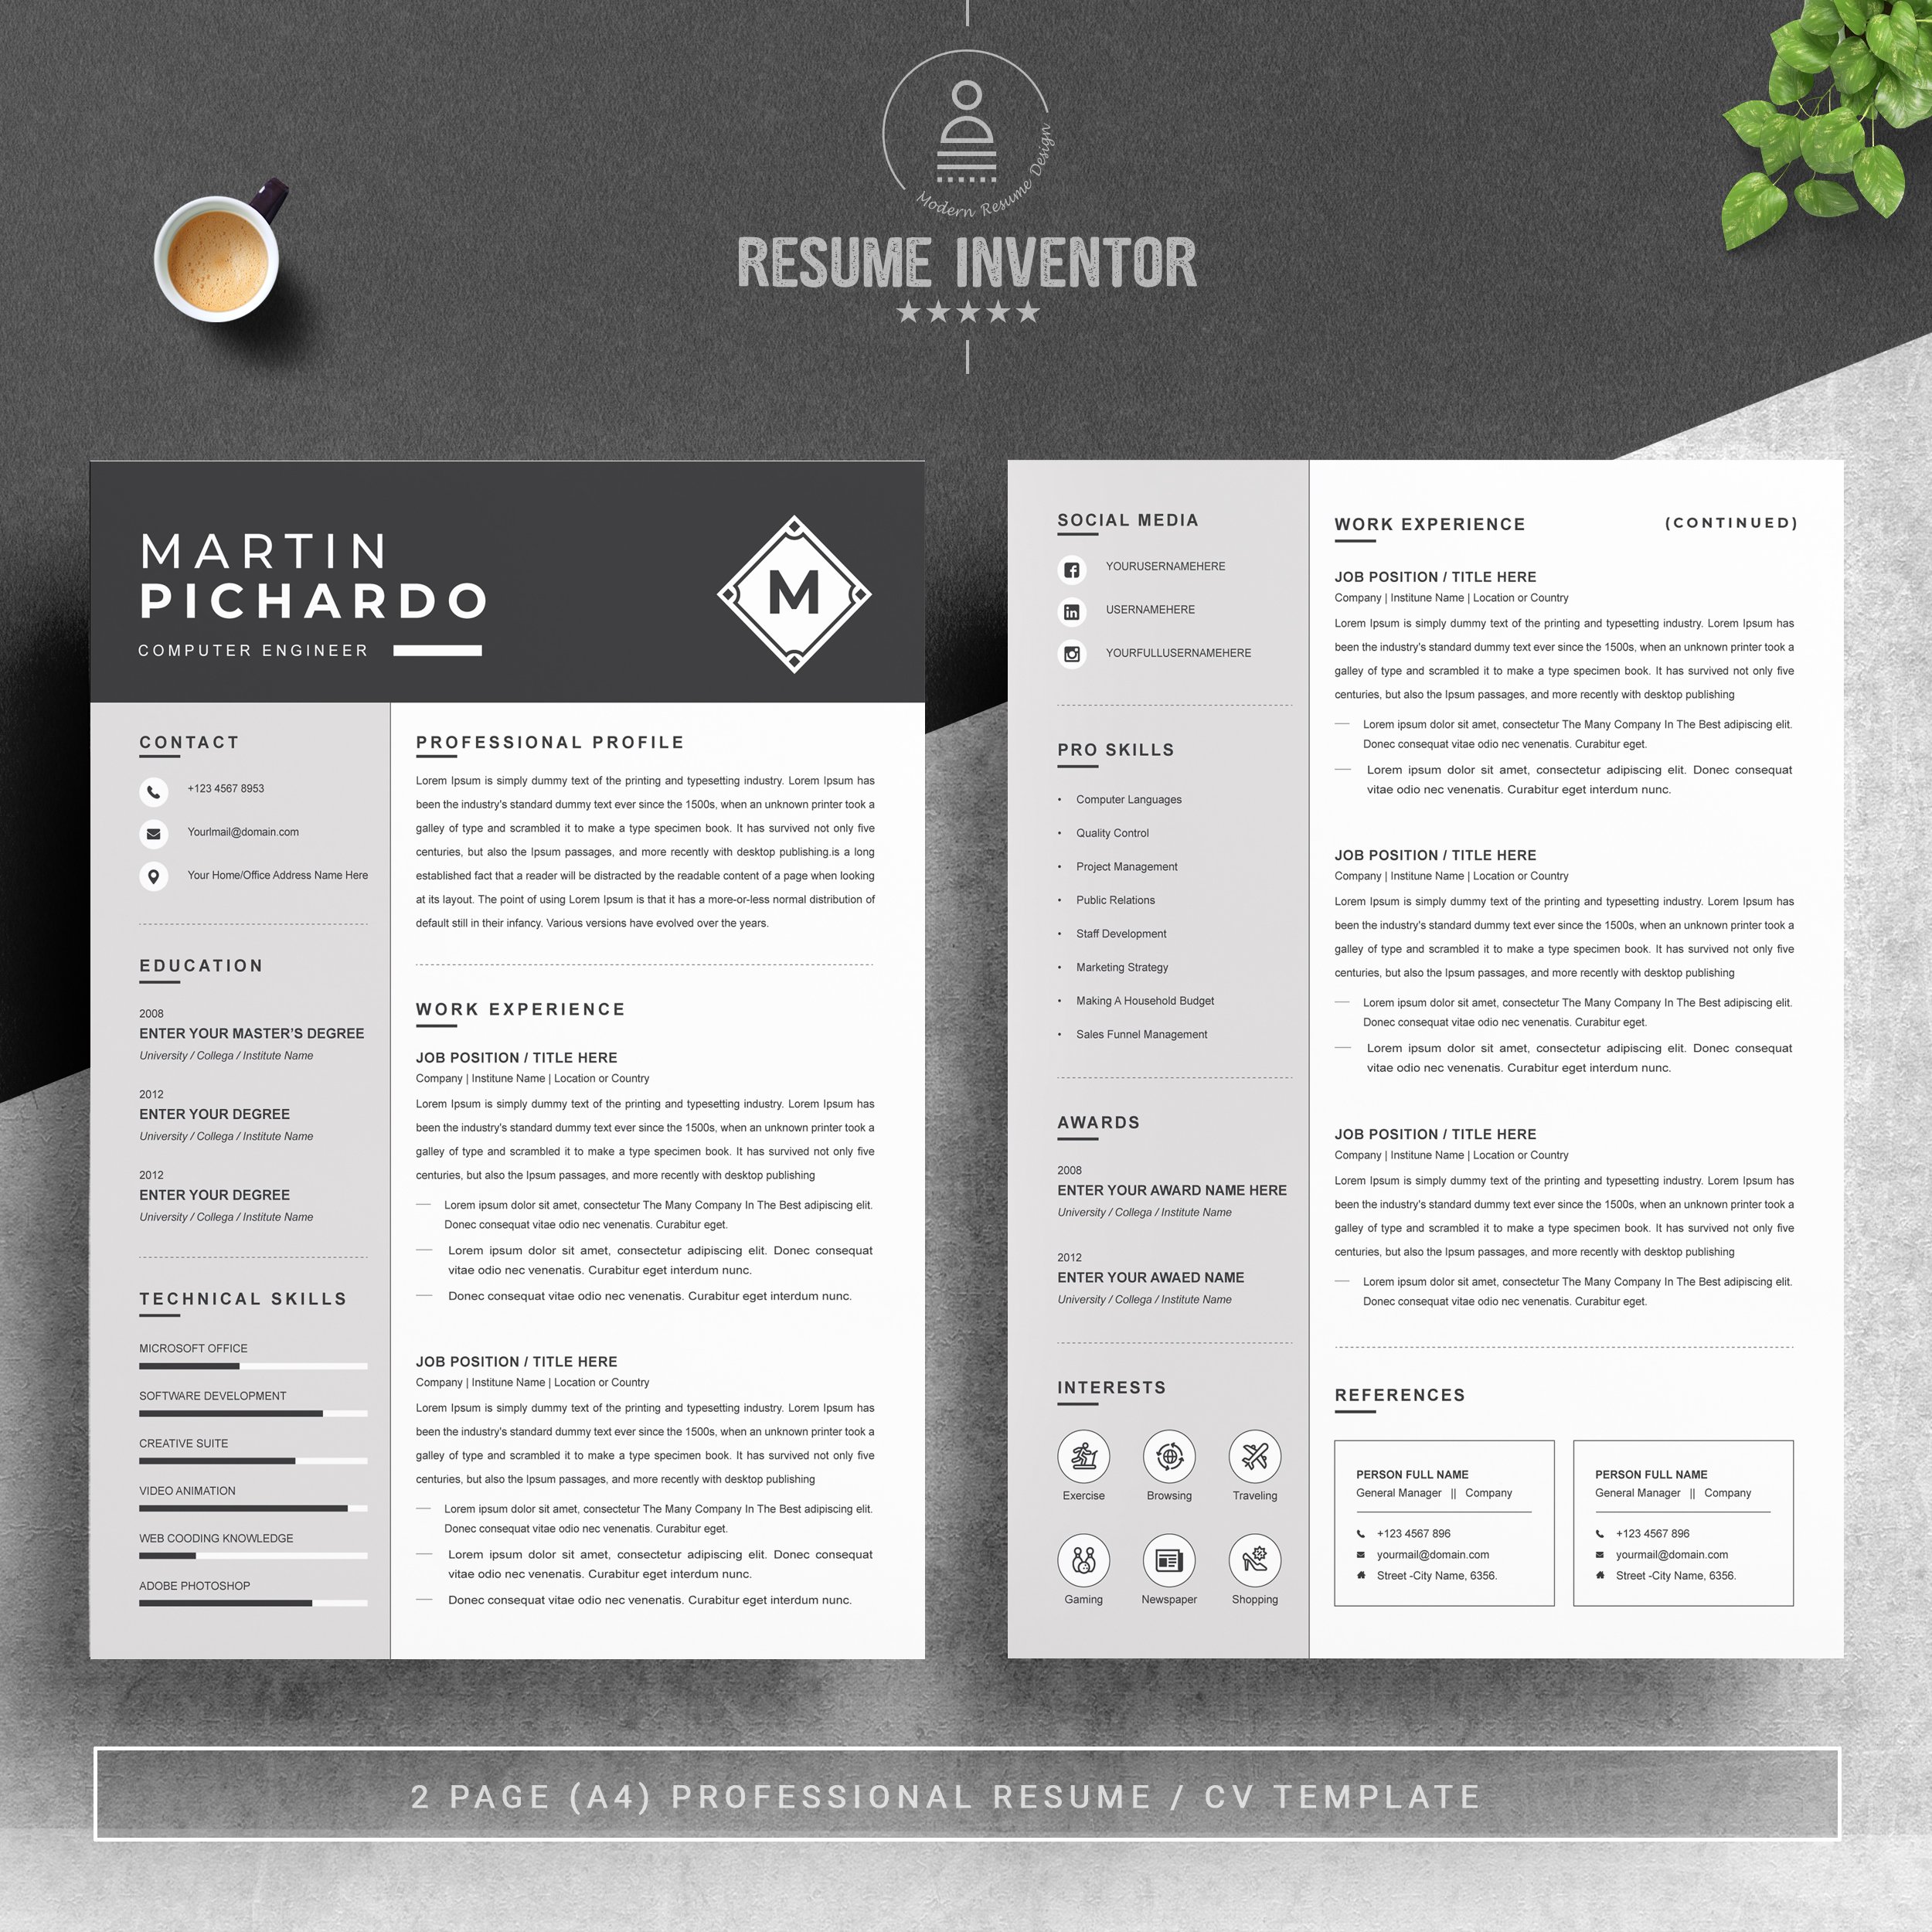 Resume / CV Design Template MS Word preview image.